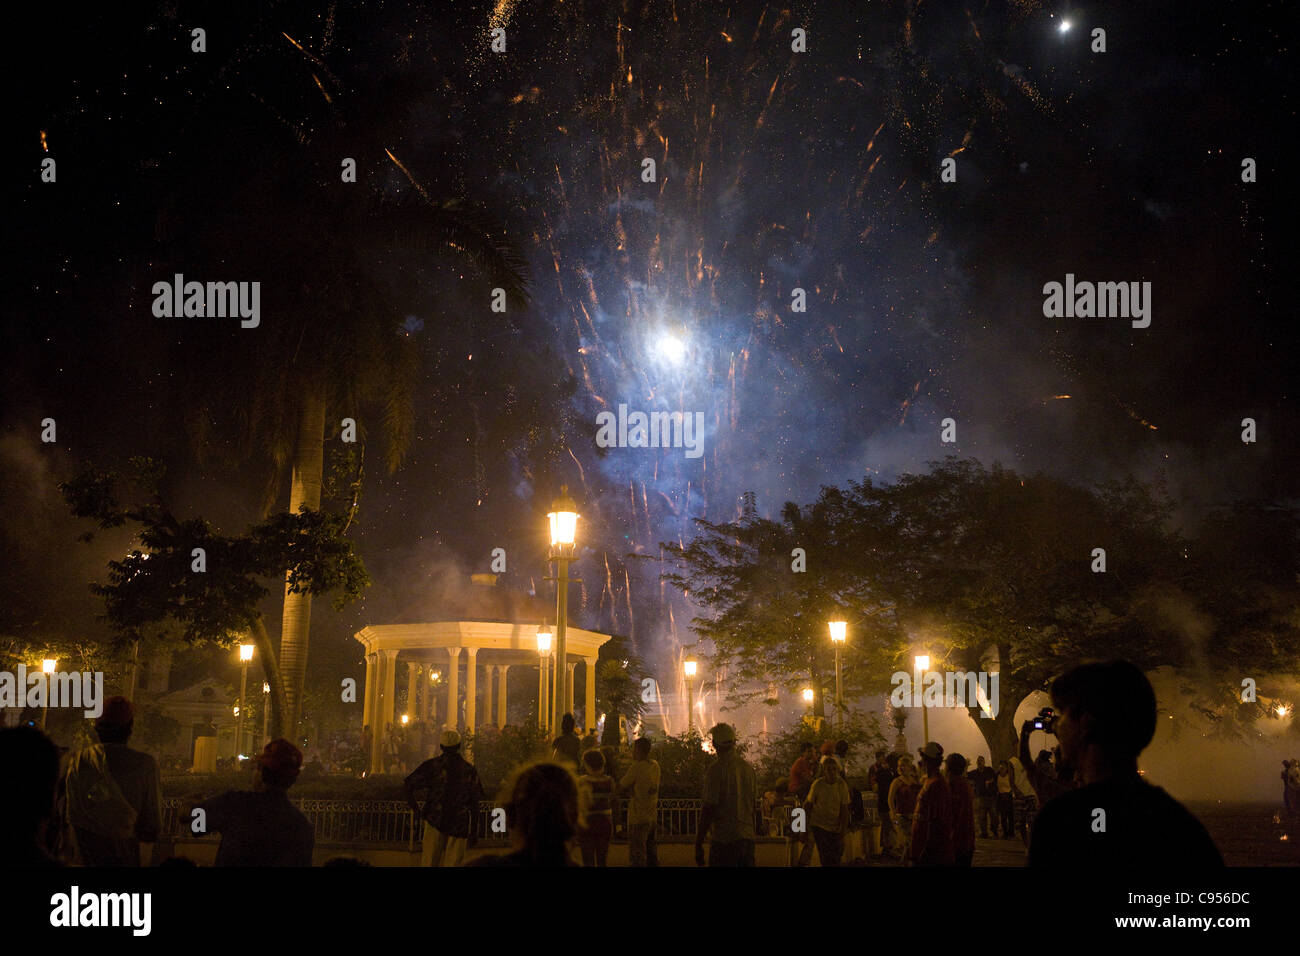 Las Parrandas de Remedios, Remedios, Cuba, Christmas Eve. Fireworks explode over the town's square well into the night of celebrations. Stock Photo